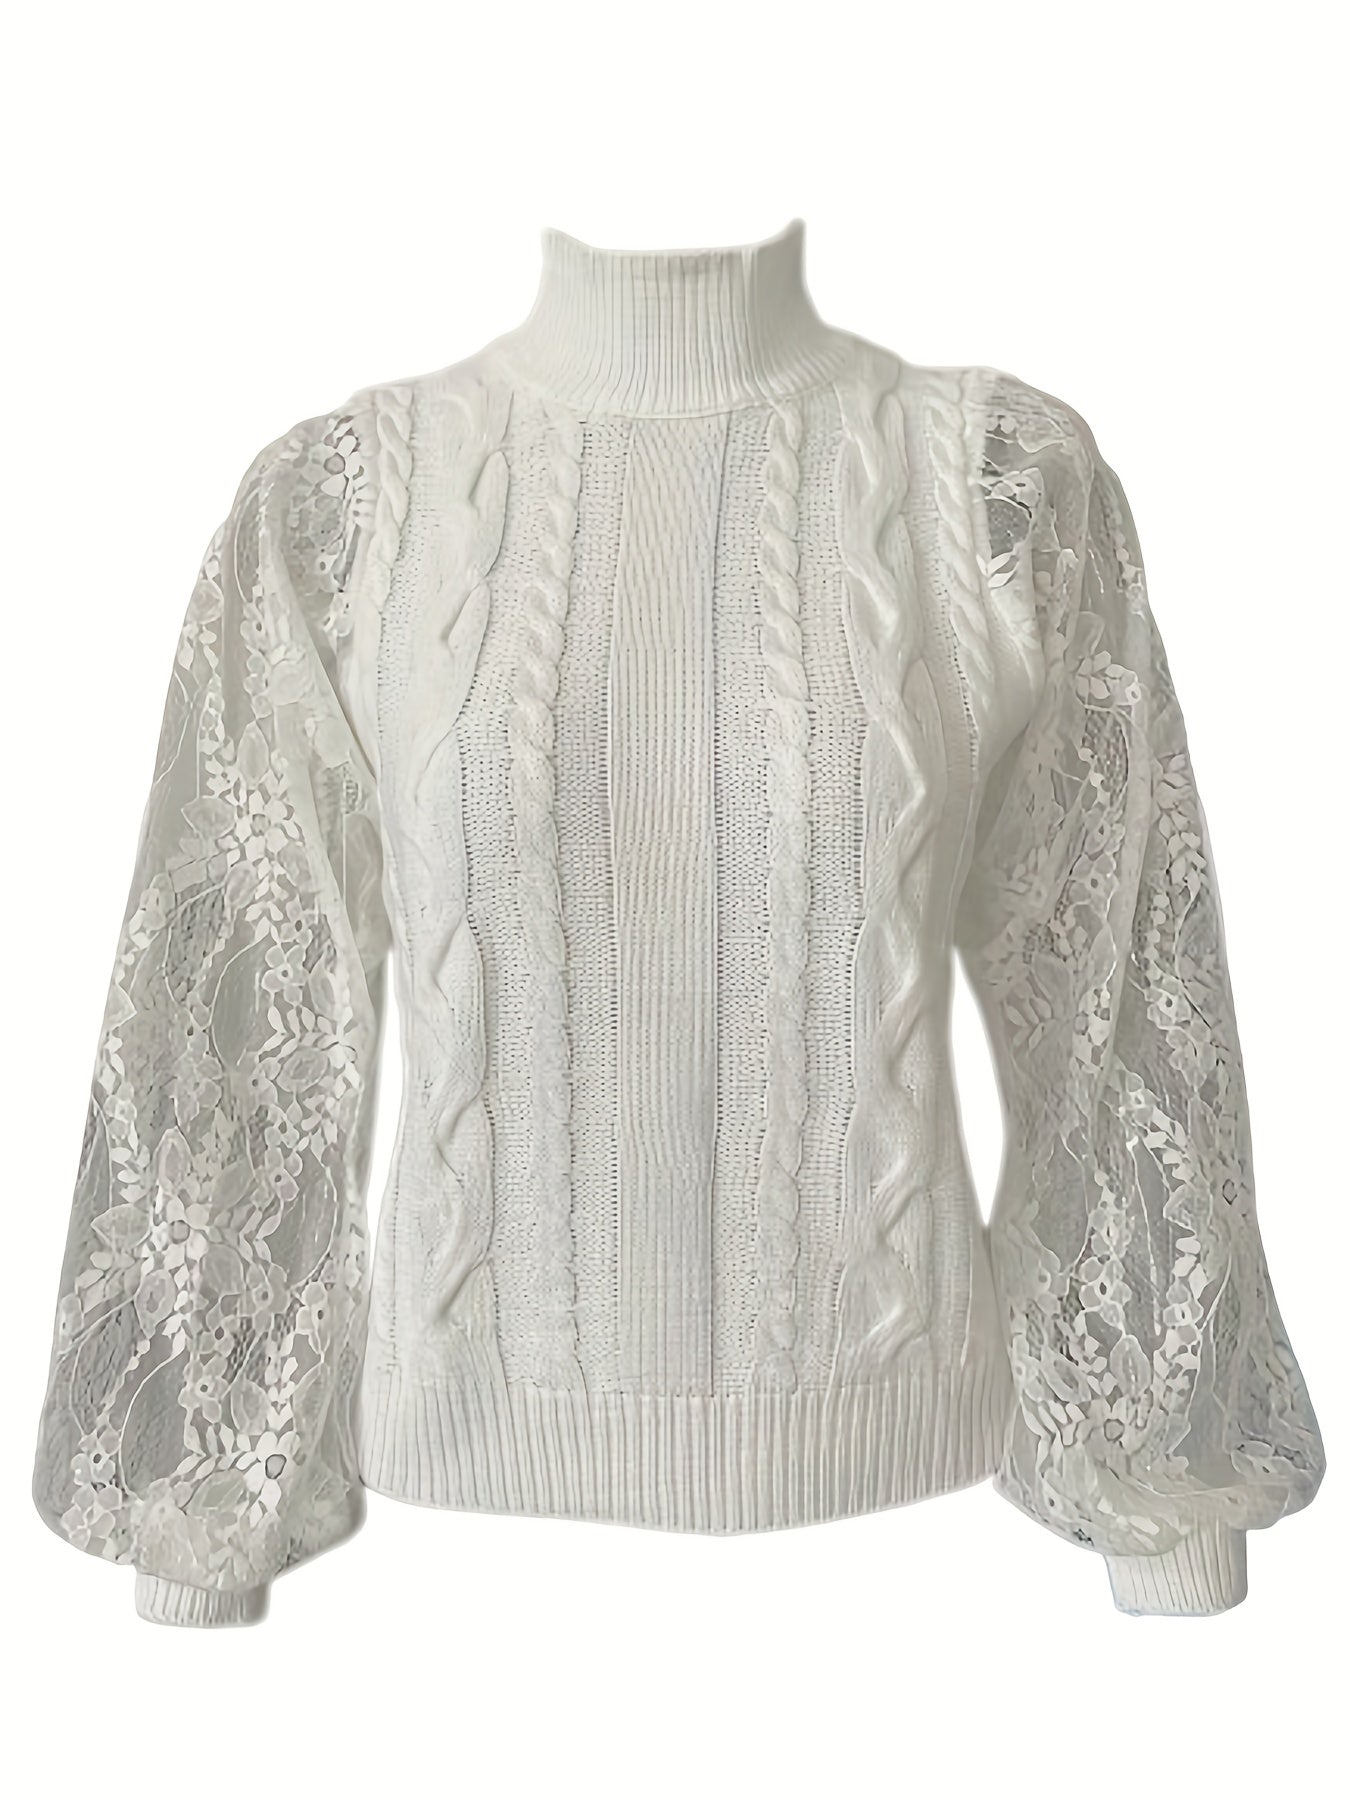 Antmvs Lace Sleeve Cable Knitted Sweater, Elegant Turtle Neck Sweater For Fall & Winter, Women's Clothing